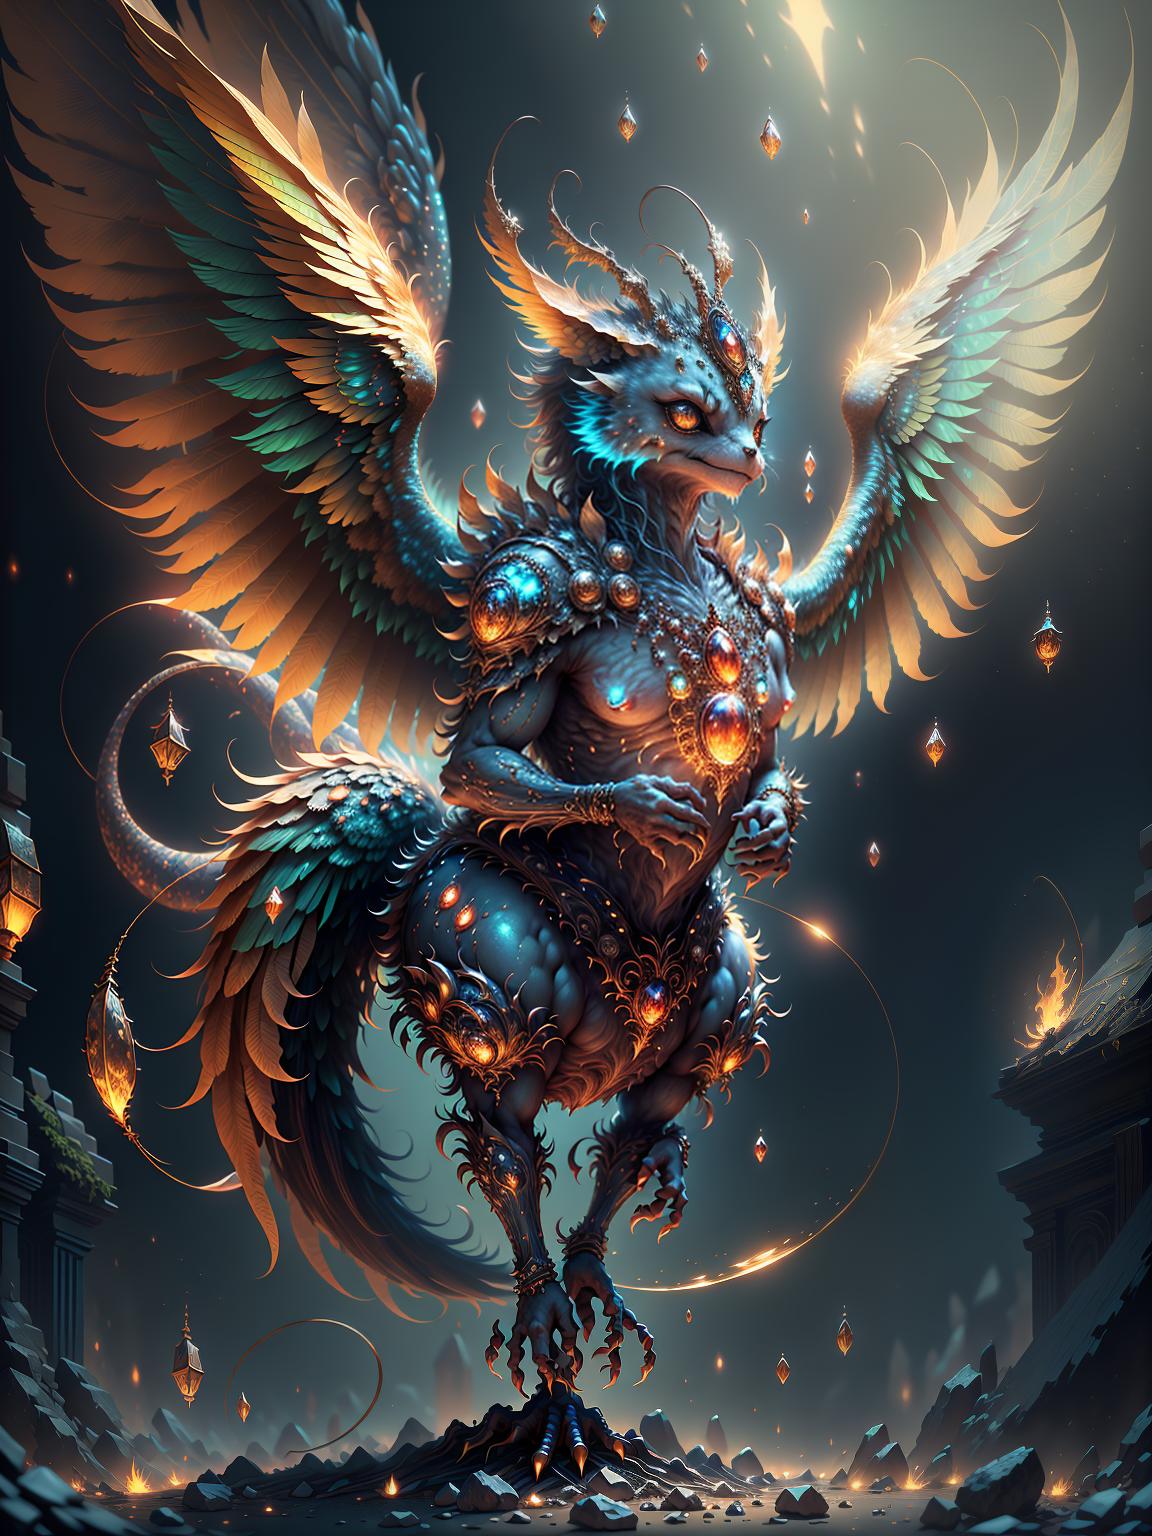  master piece, best quality, ultra detailed, highres, 4k.8k, Phoenix King, Rising from the ashes, spreading its wings, Regal and majestic, BREAK Revival of the immortal king, Ancient temple ruins, Ruins, glowing crystals, ancient scrolls, mystical artifacts, BREAK Mystical and awe inspiring, Golden light, swirling embers, ethereal glow, vibrant colors, creature00d,Cu73Cre4ture